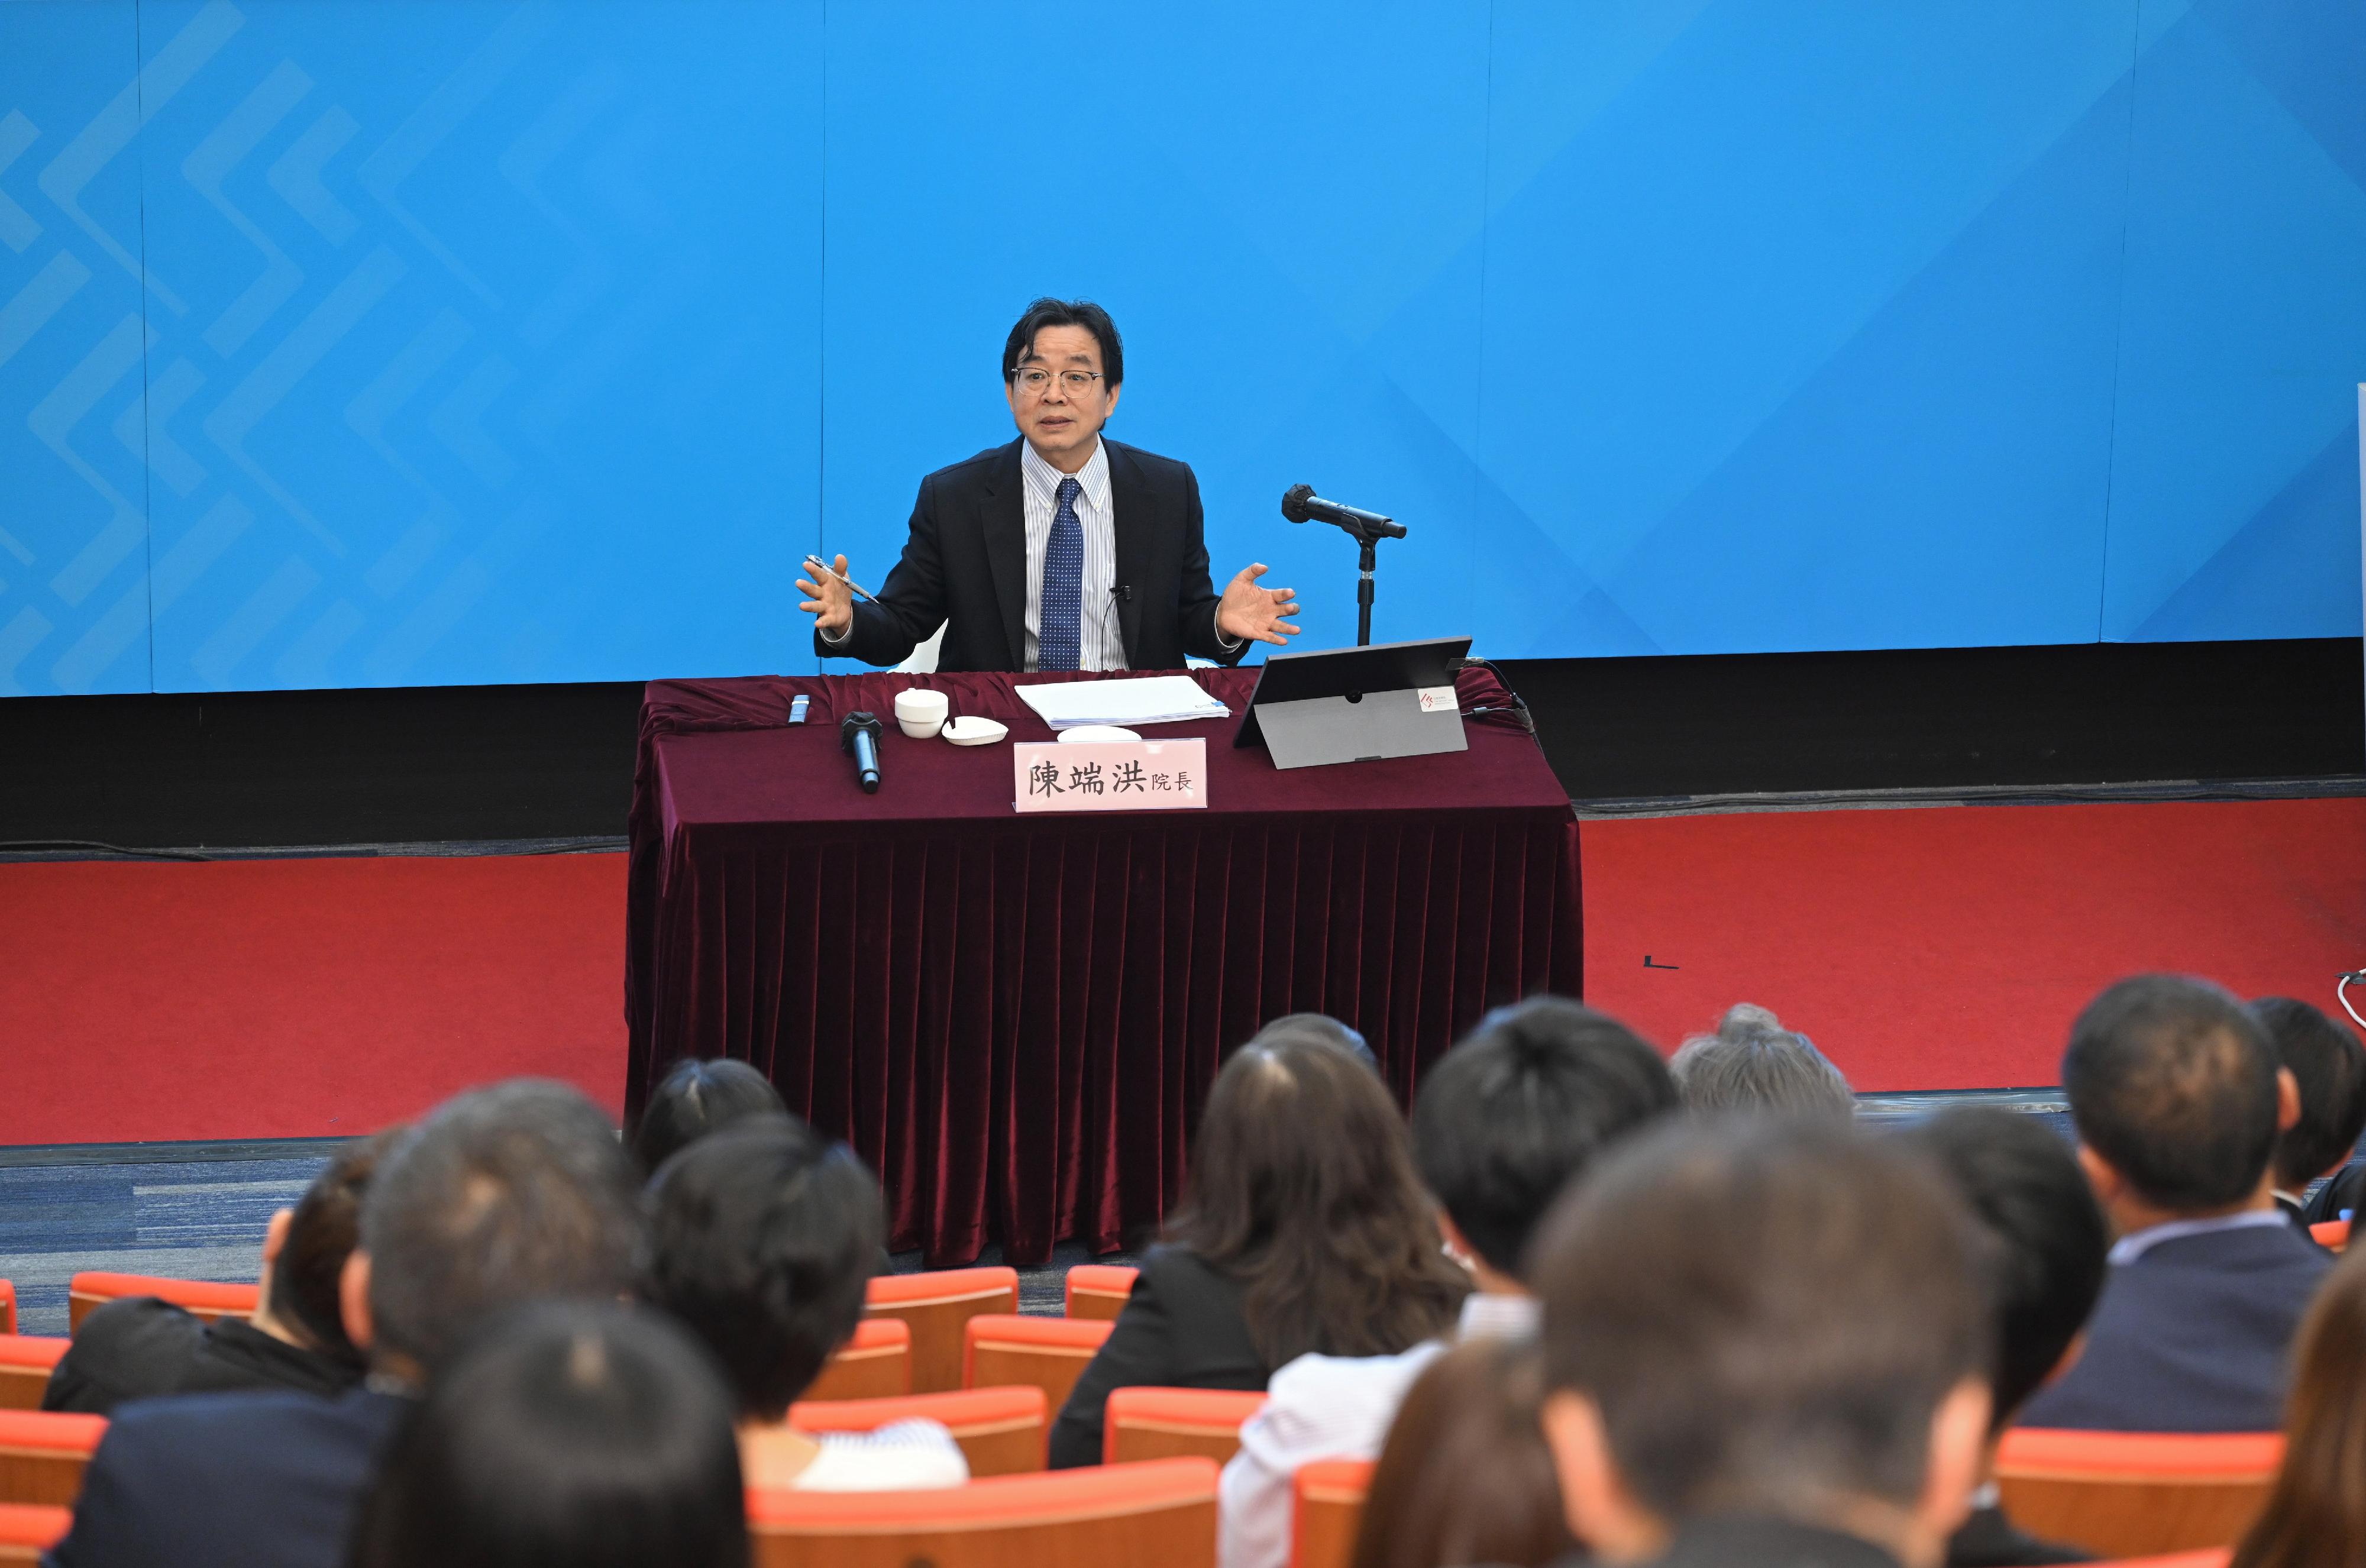 The Civil Service College of the Civil Service Bureau, in collaboration with the Institute for Hong Kong and Macau Studies, Peking University, launched an in-depth programme on "one country, two systems" and the contemporary China and organised a lecture on the topic of "The Chinese Constitutional System: the Country's Authority Structure" today (August 22). Photo shows the Director of the Institute for Hong Kong and Macau Studies, Peking University, Professor Chen Duanhong, delivering the lecture.